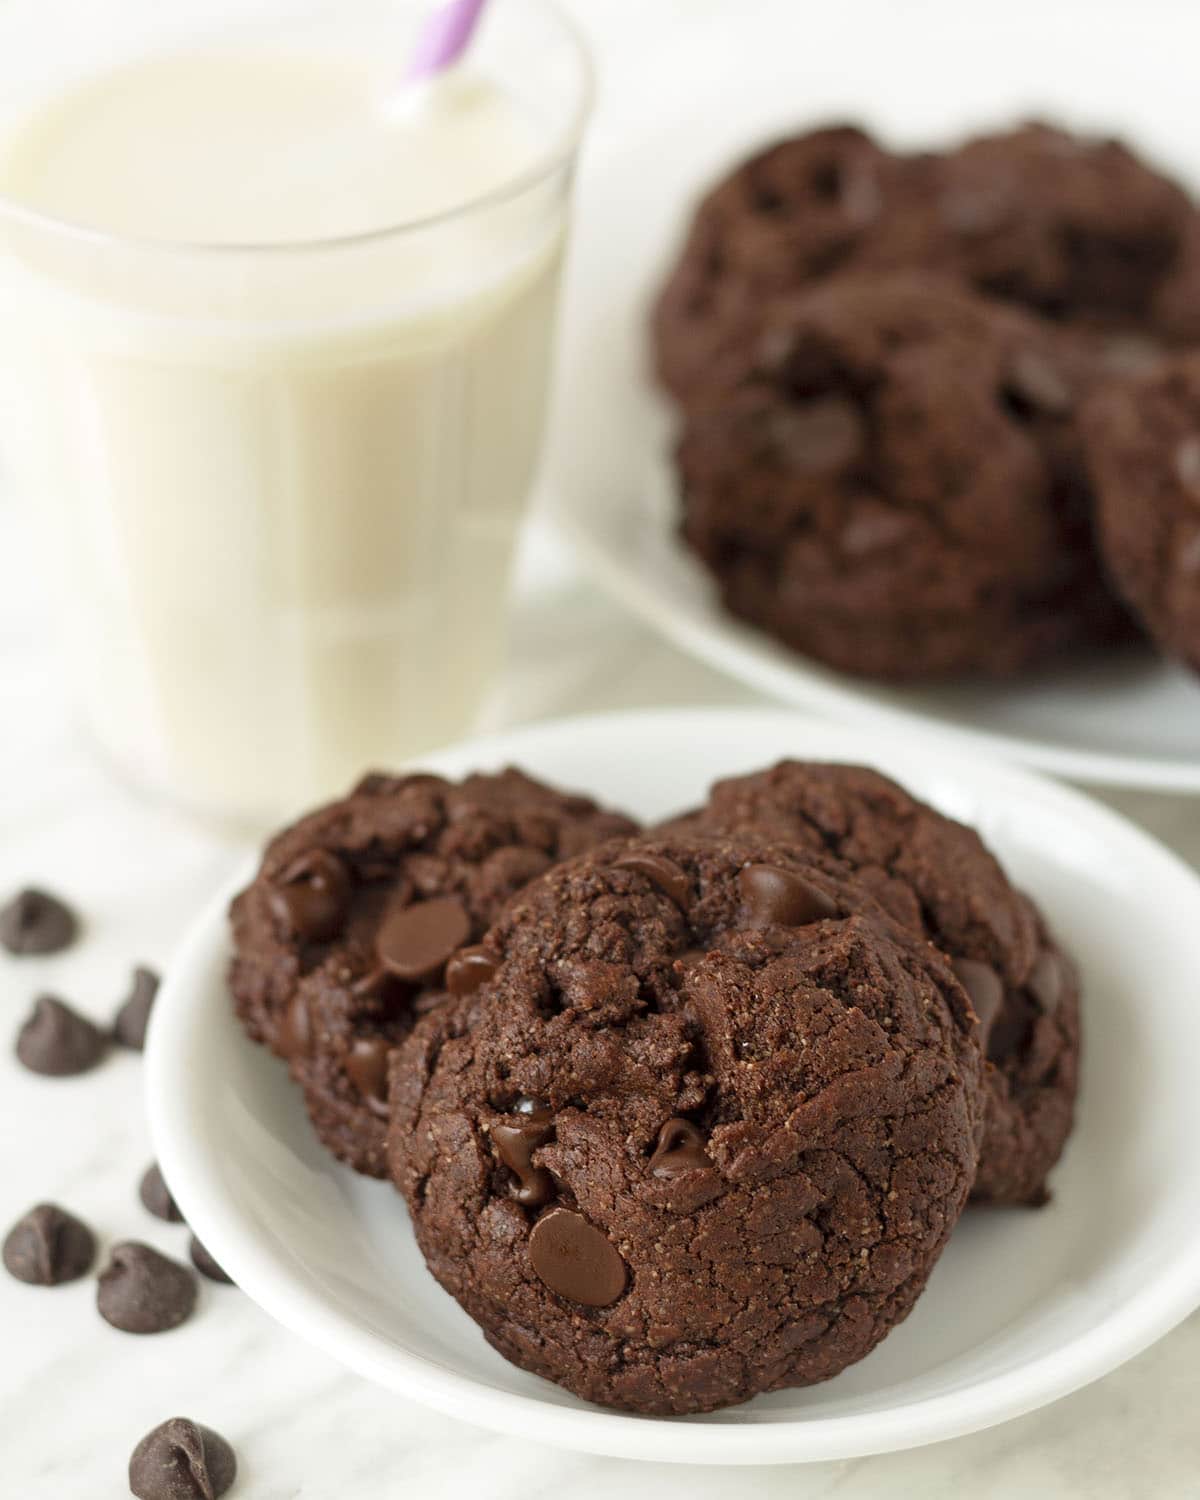 Three chocolate cookies on a small plate, a plate full of cookies and a glass of almond milk sits behind the plate.